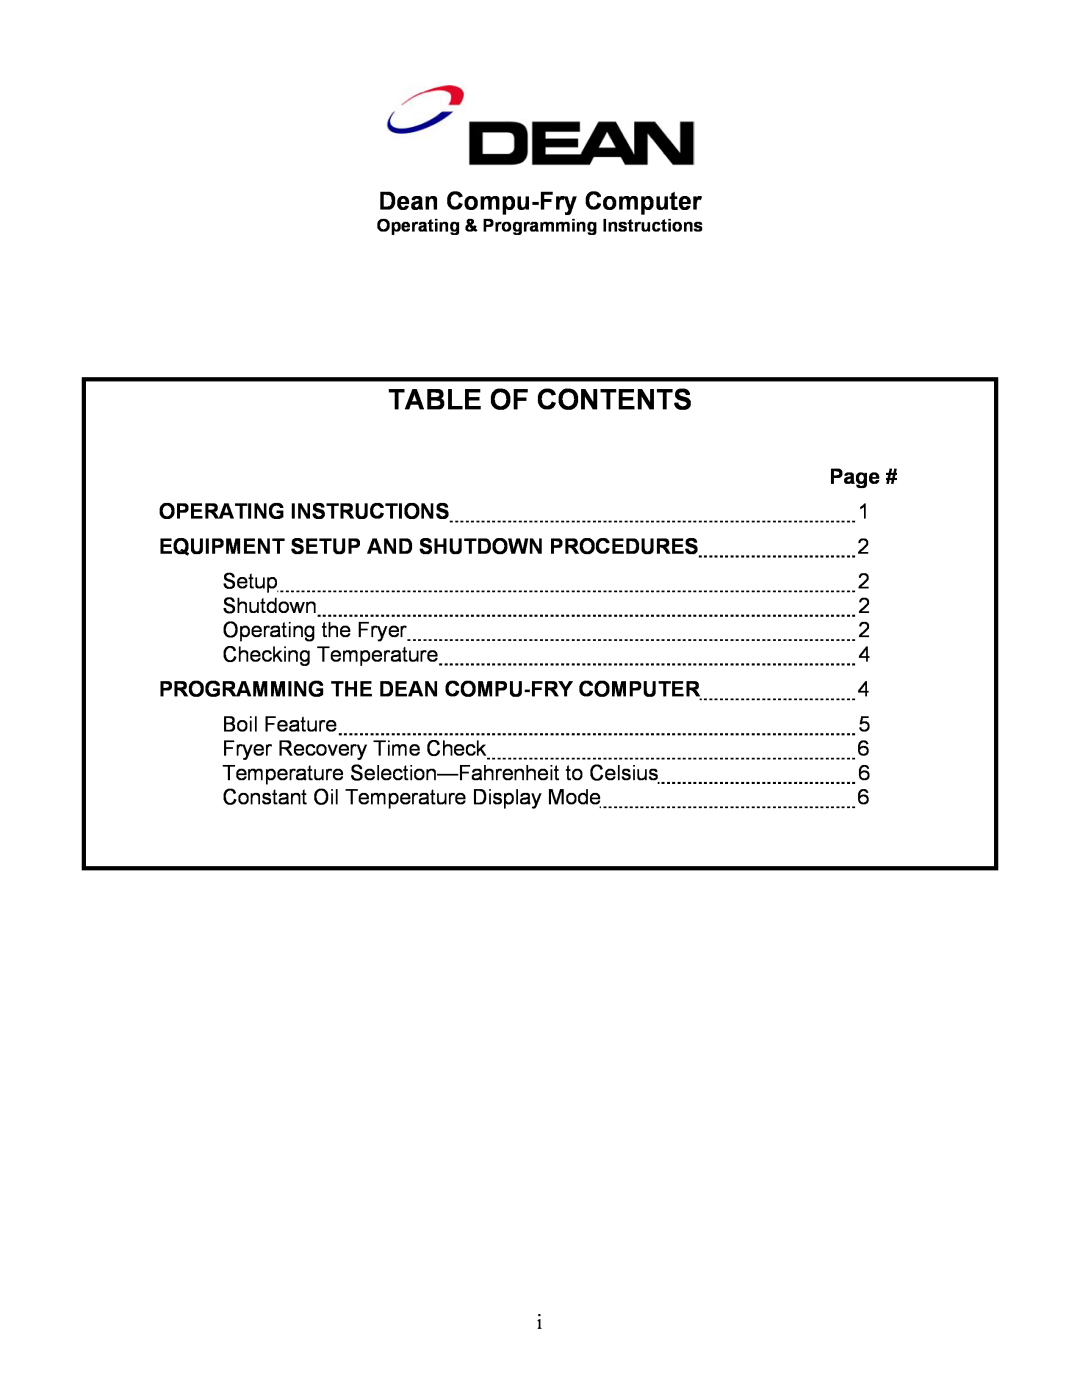 Frymaster Table Of Contents, Dean Compu-Fry Computer, Operating Instructions, Equipment Setup And Shutdown Procedures 